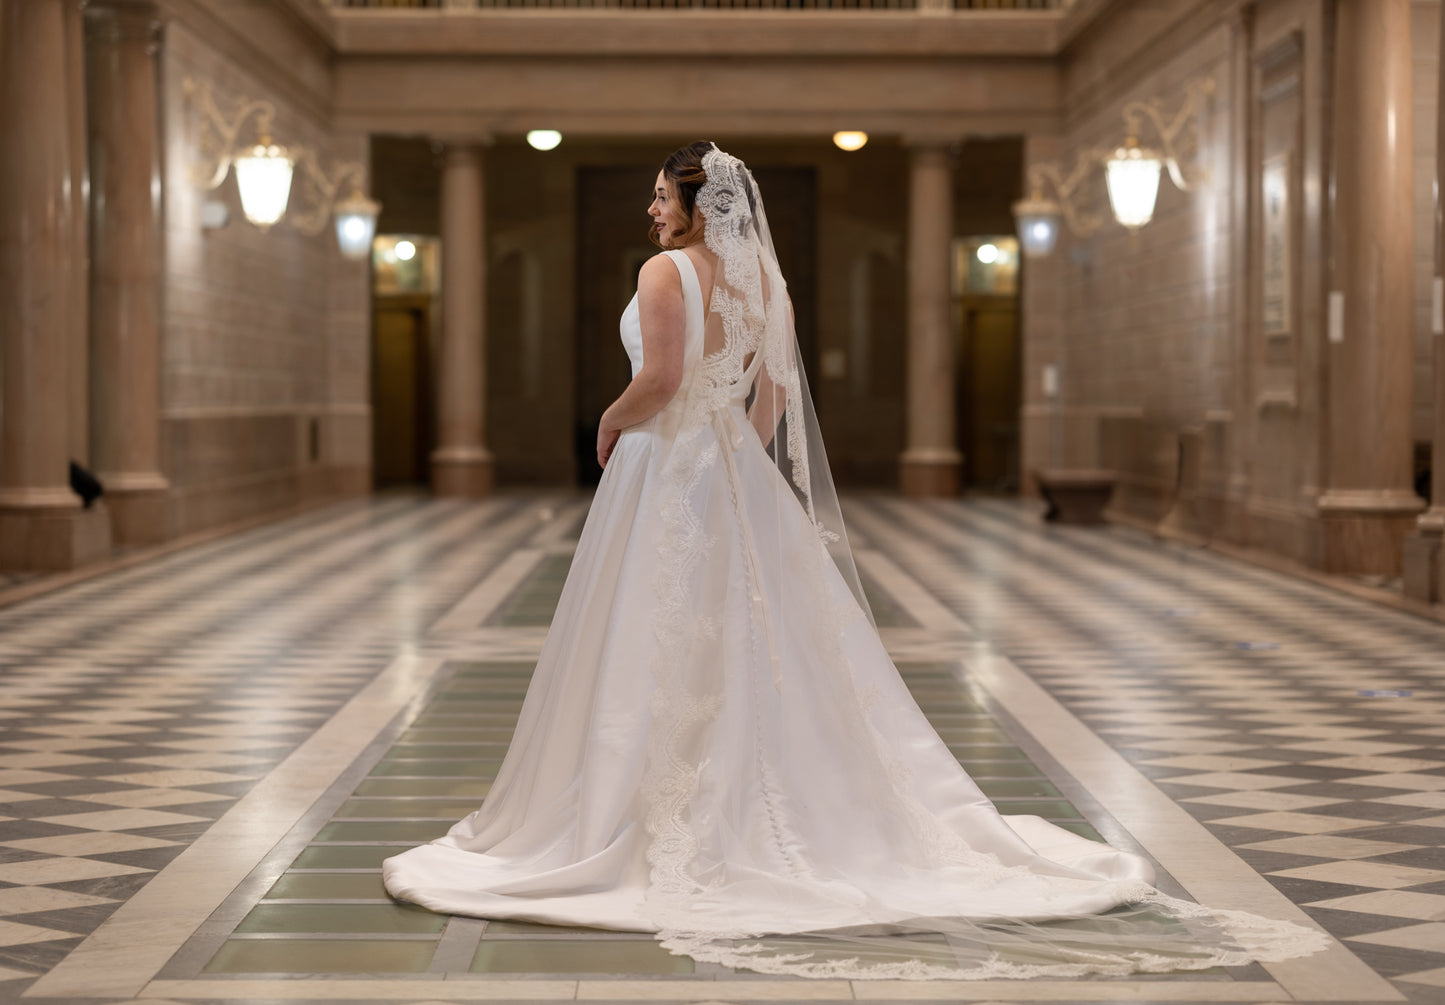 Briella cathedral mantilla veil by Dhibi Couture